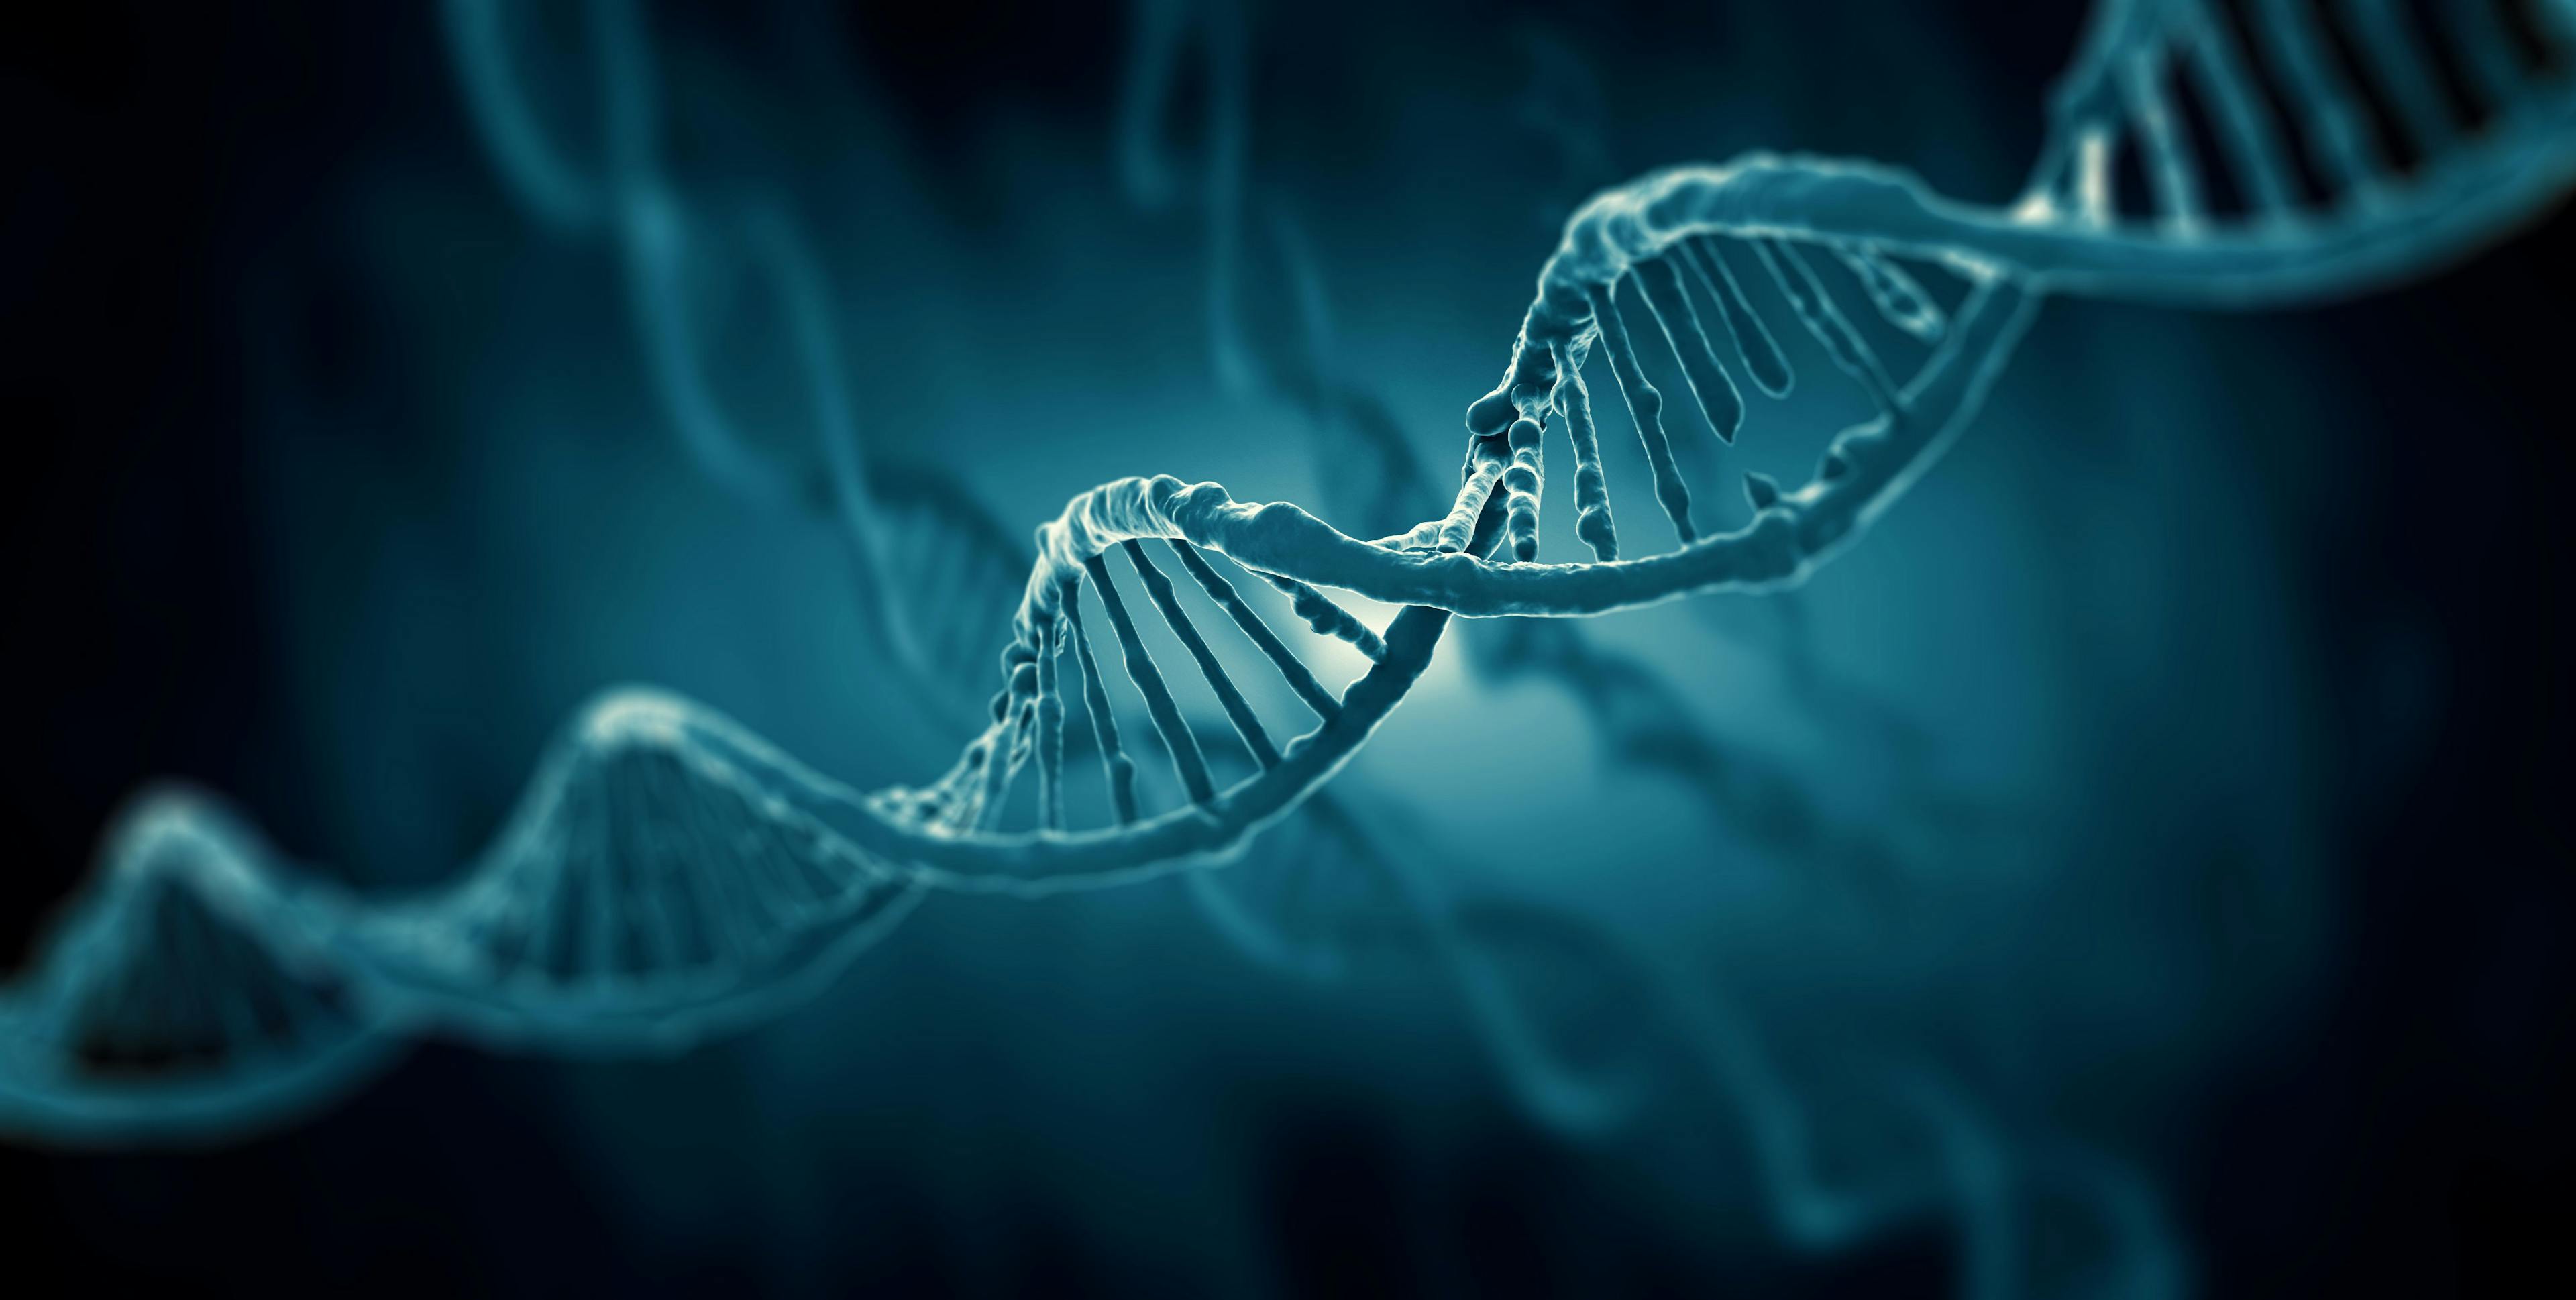 3d render of dna structure, abstract background | Image Credit: © Giovanni Cancemi - stock.adobe.com